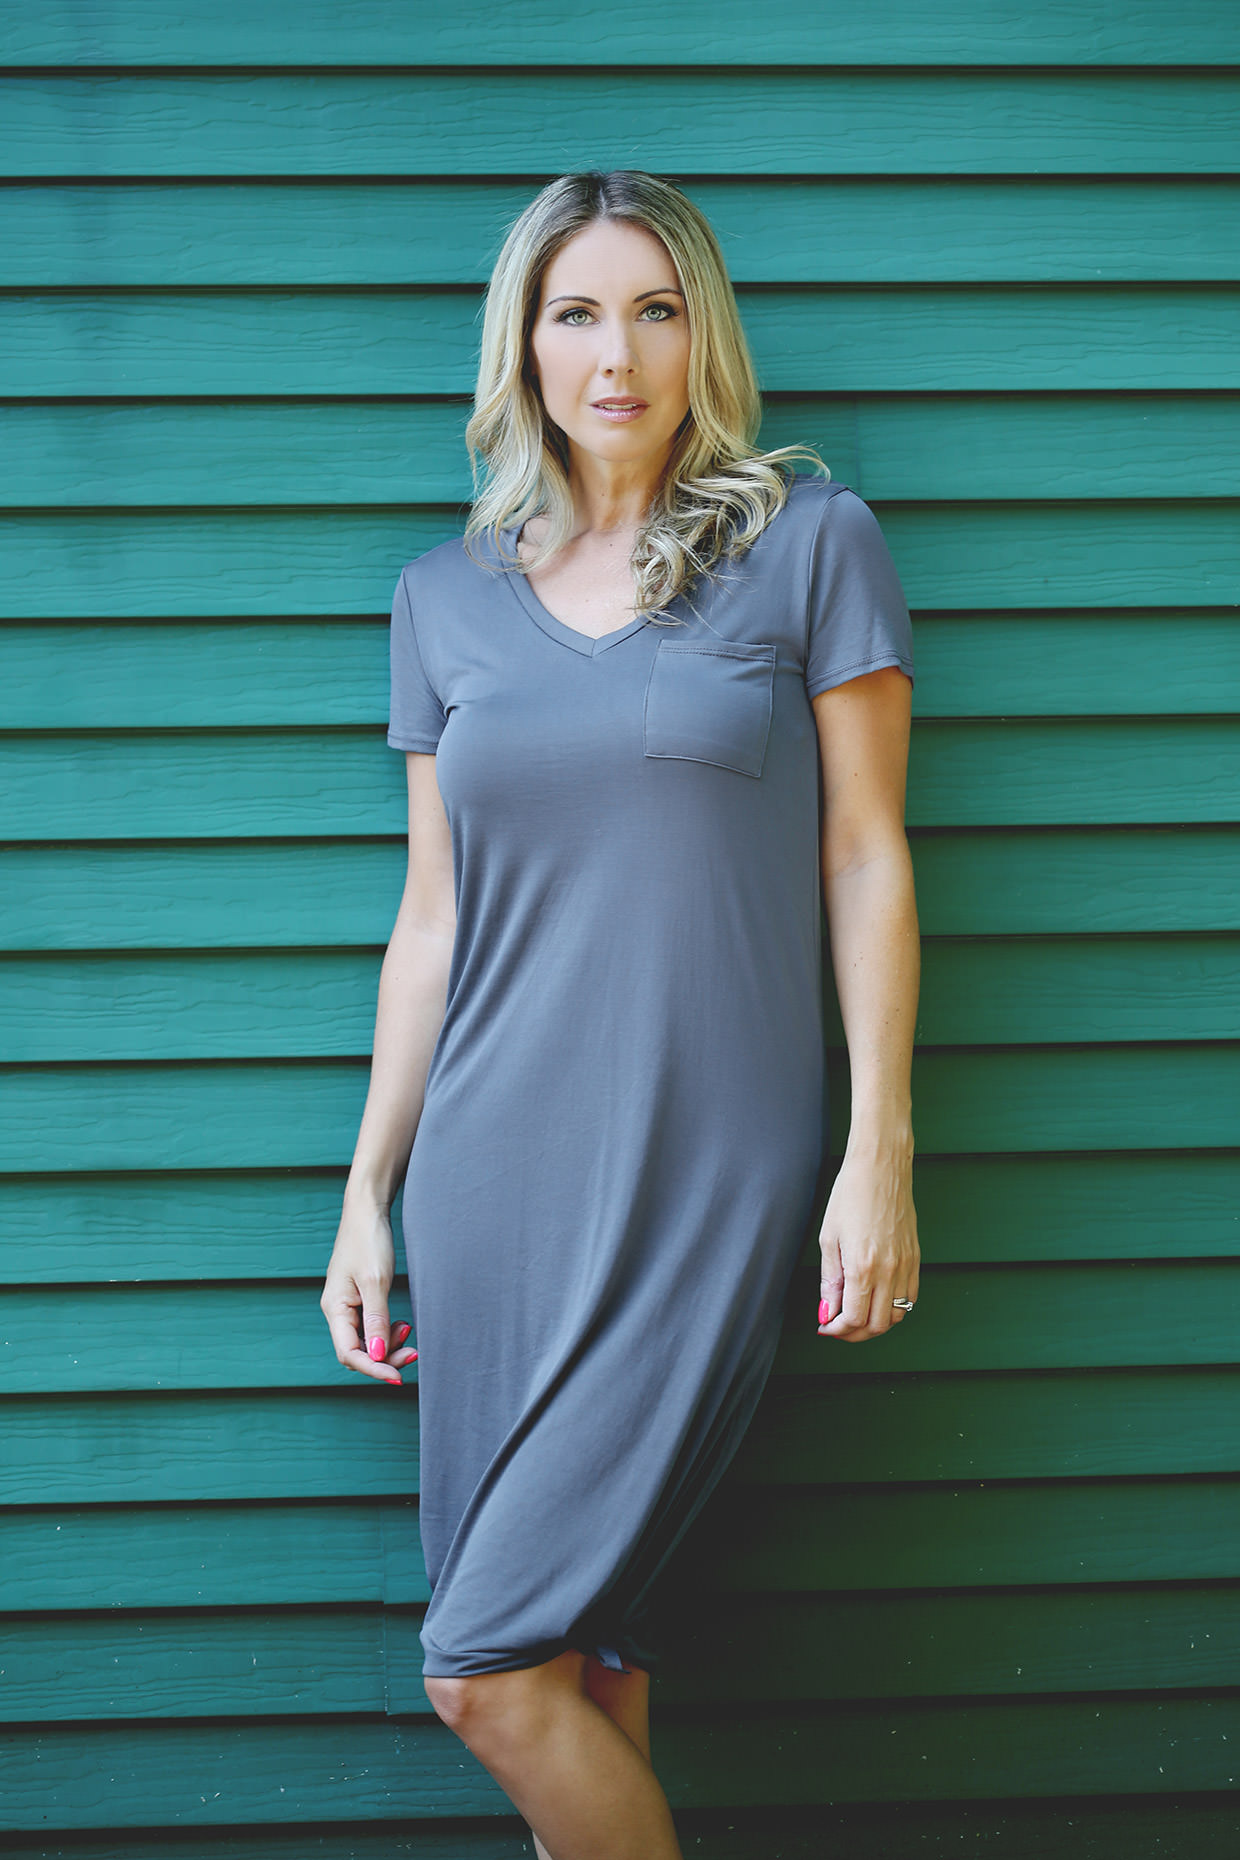 Silver Icing Flash Sale: Why We Love a T-Shirt Dress